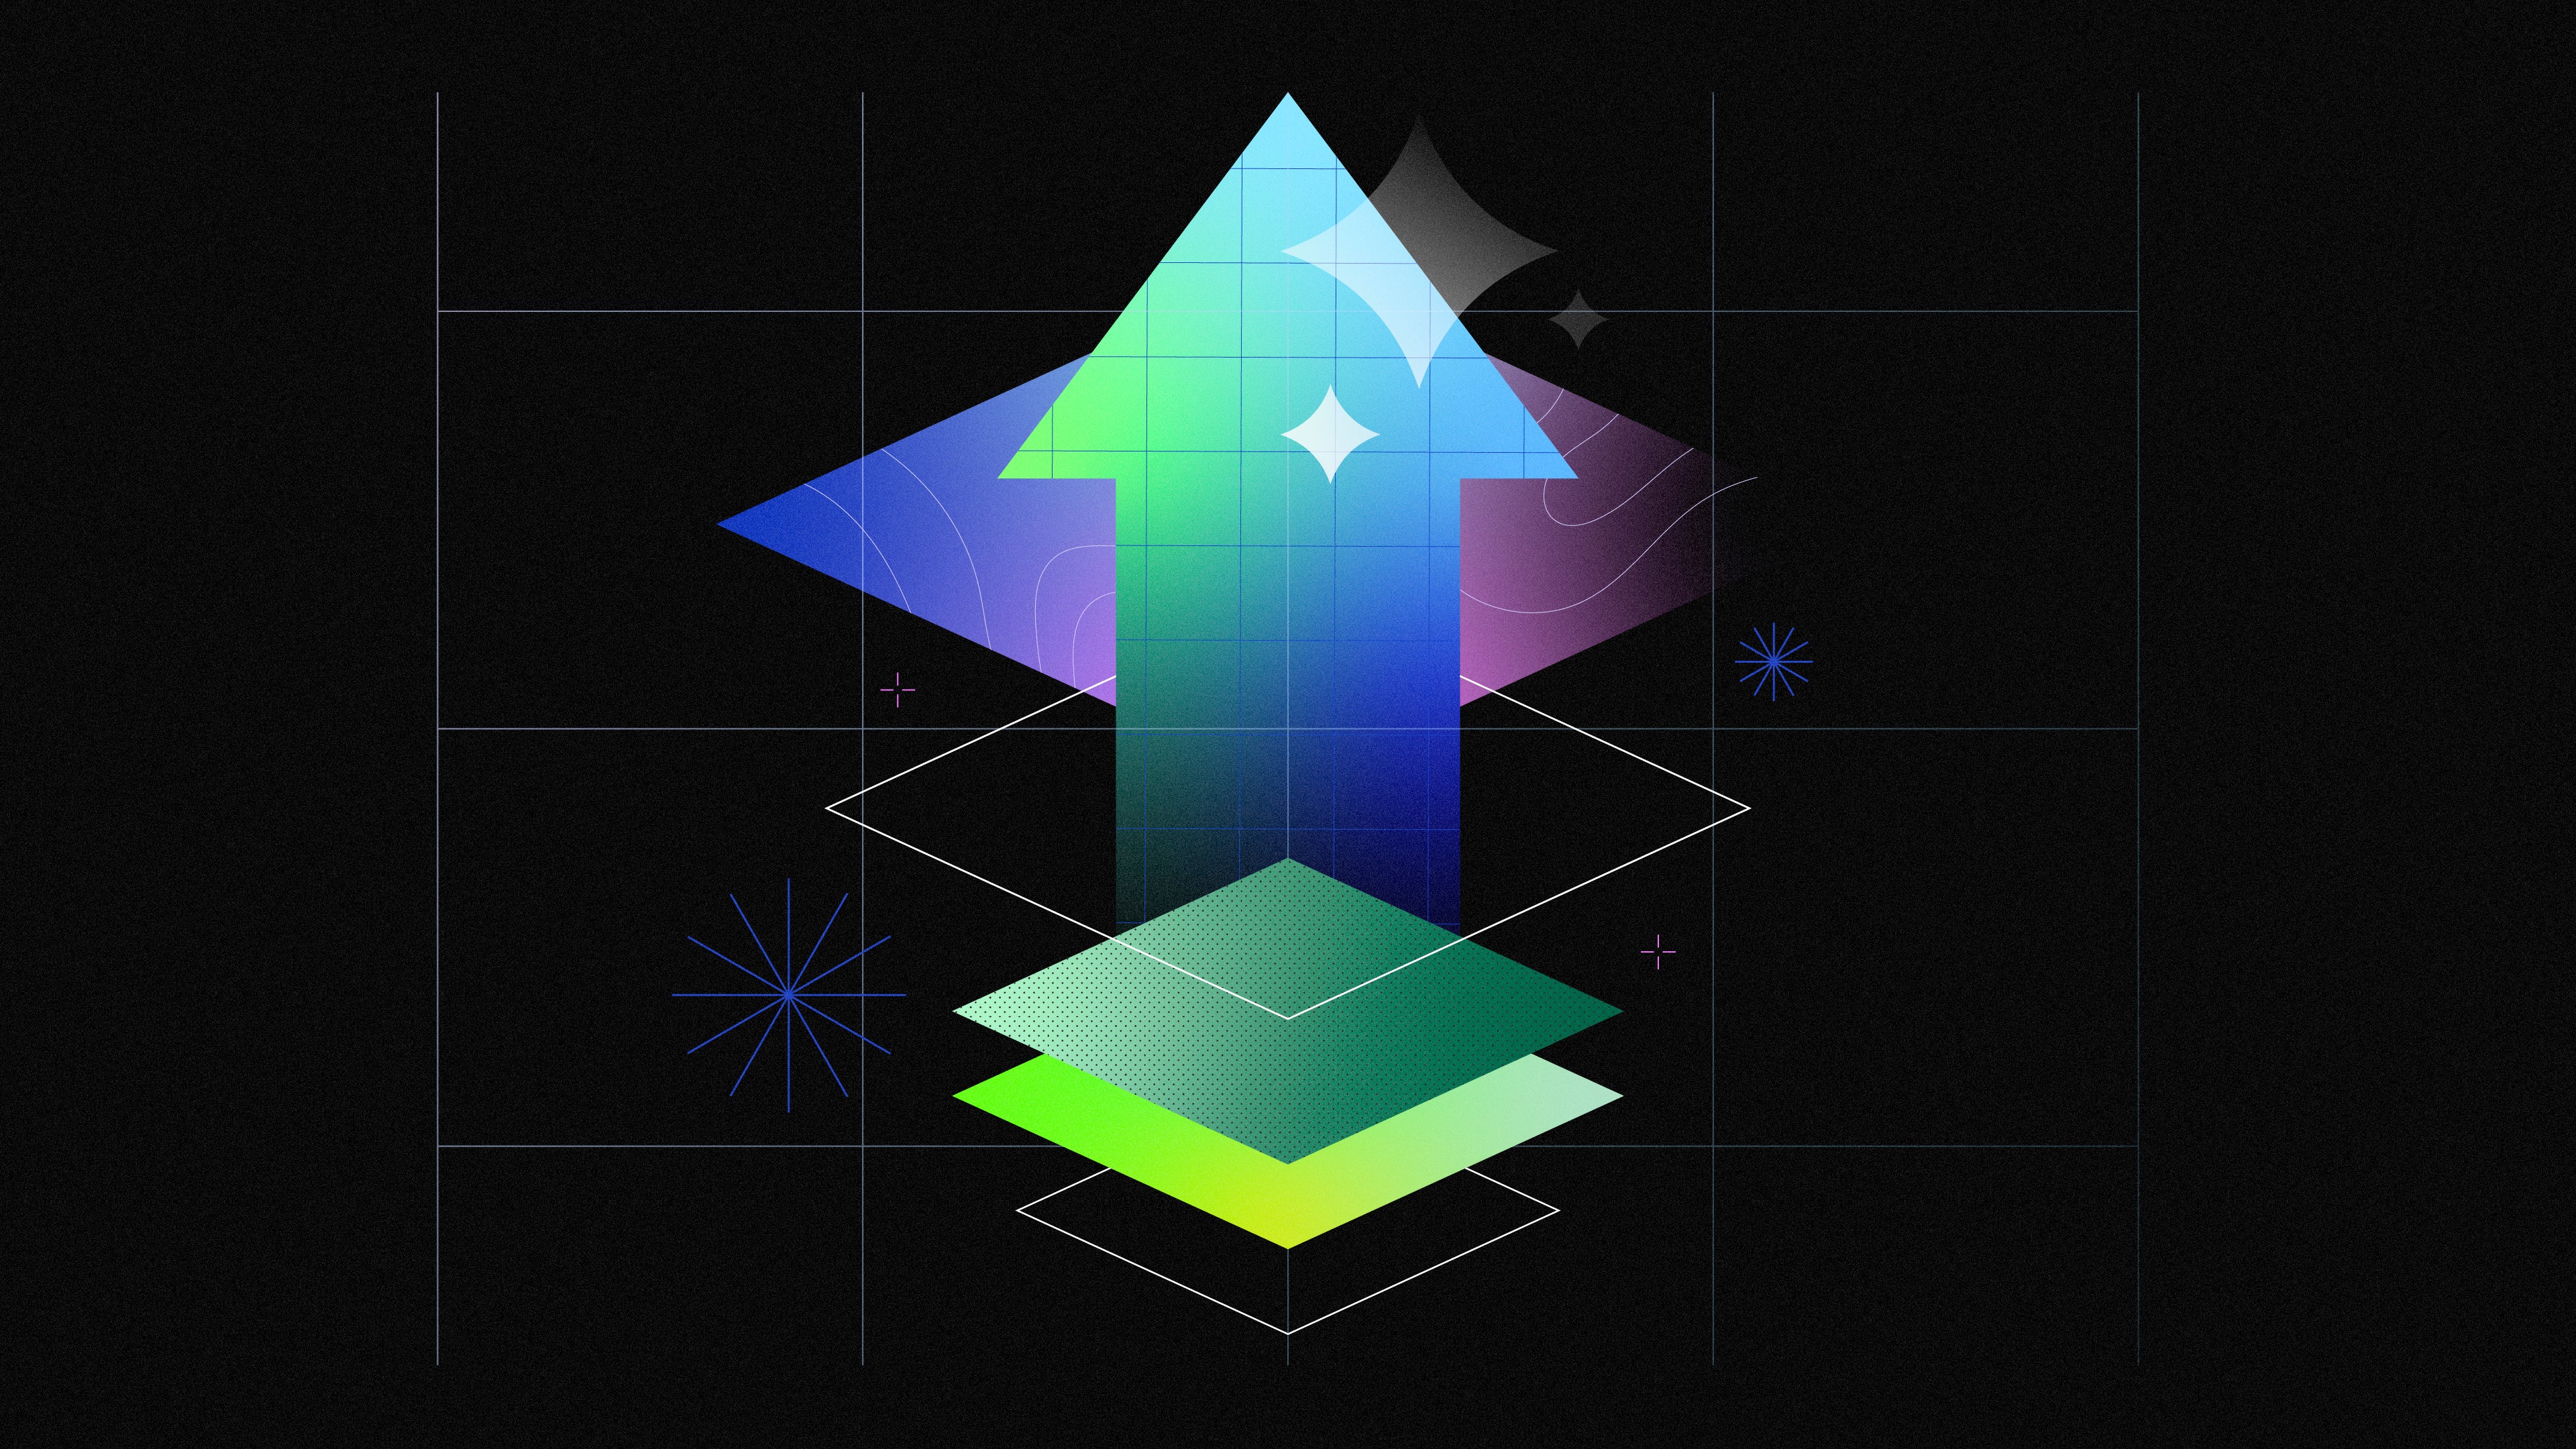 Abstract geometric artwork featuring a central upward arrow composed of gradient colors, surrounded by various shapes and stars on a dark background.